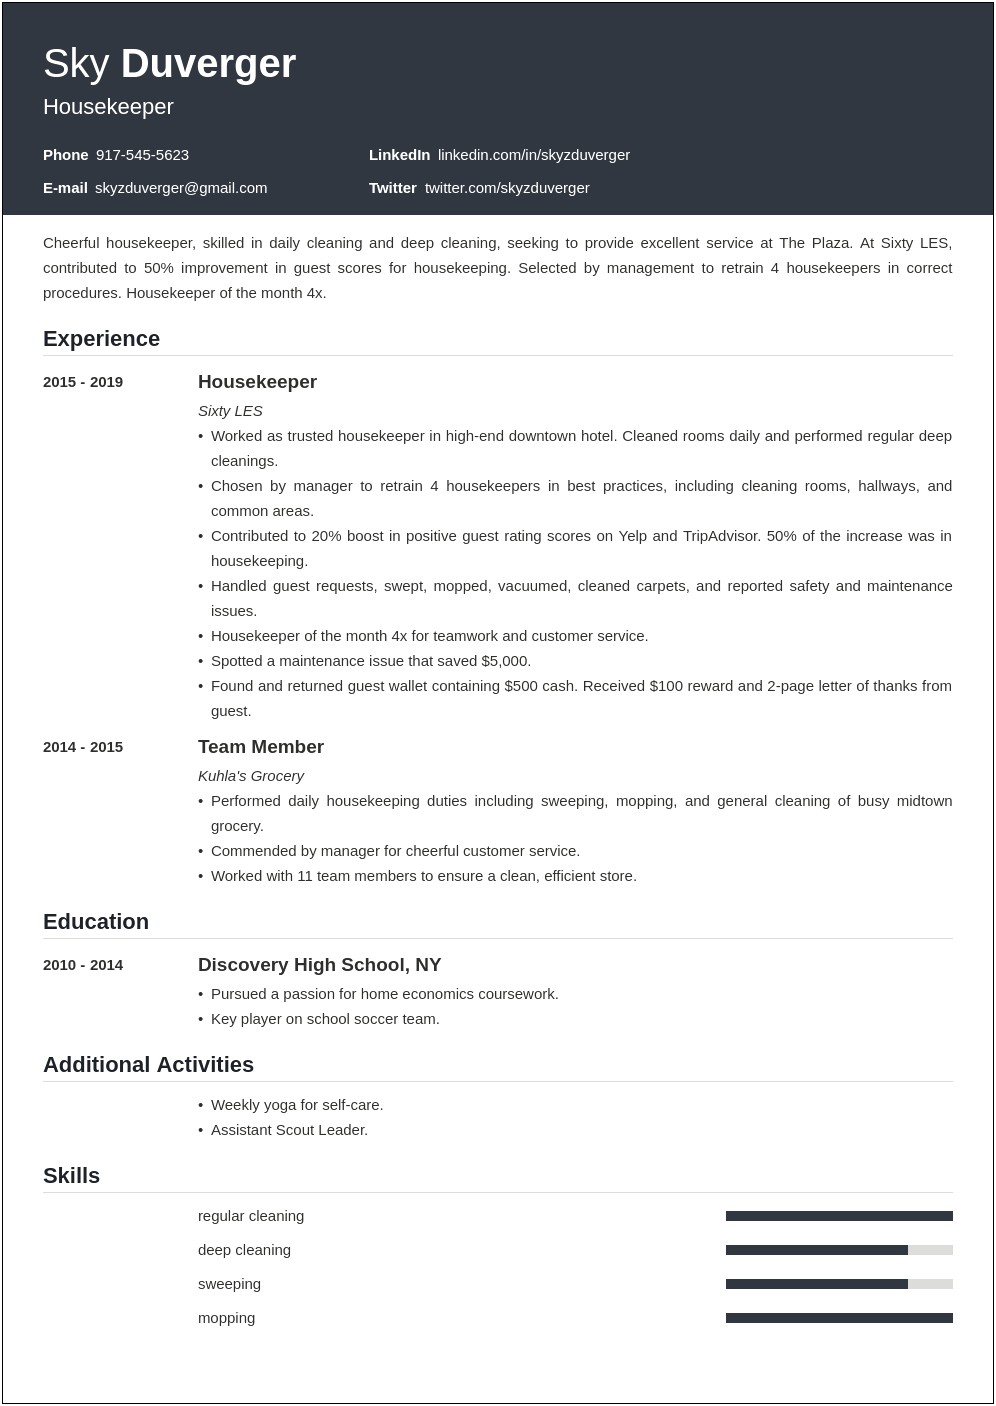 House Cleaning Skills For Resume